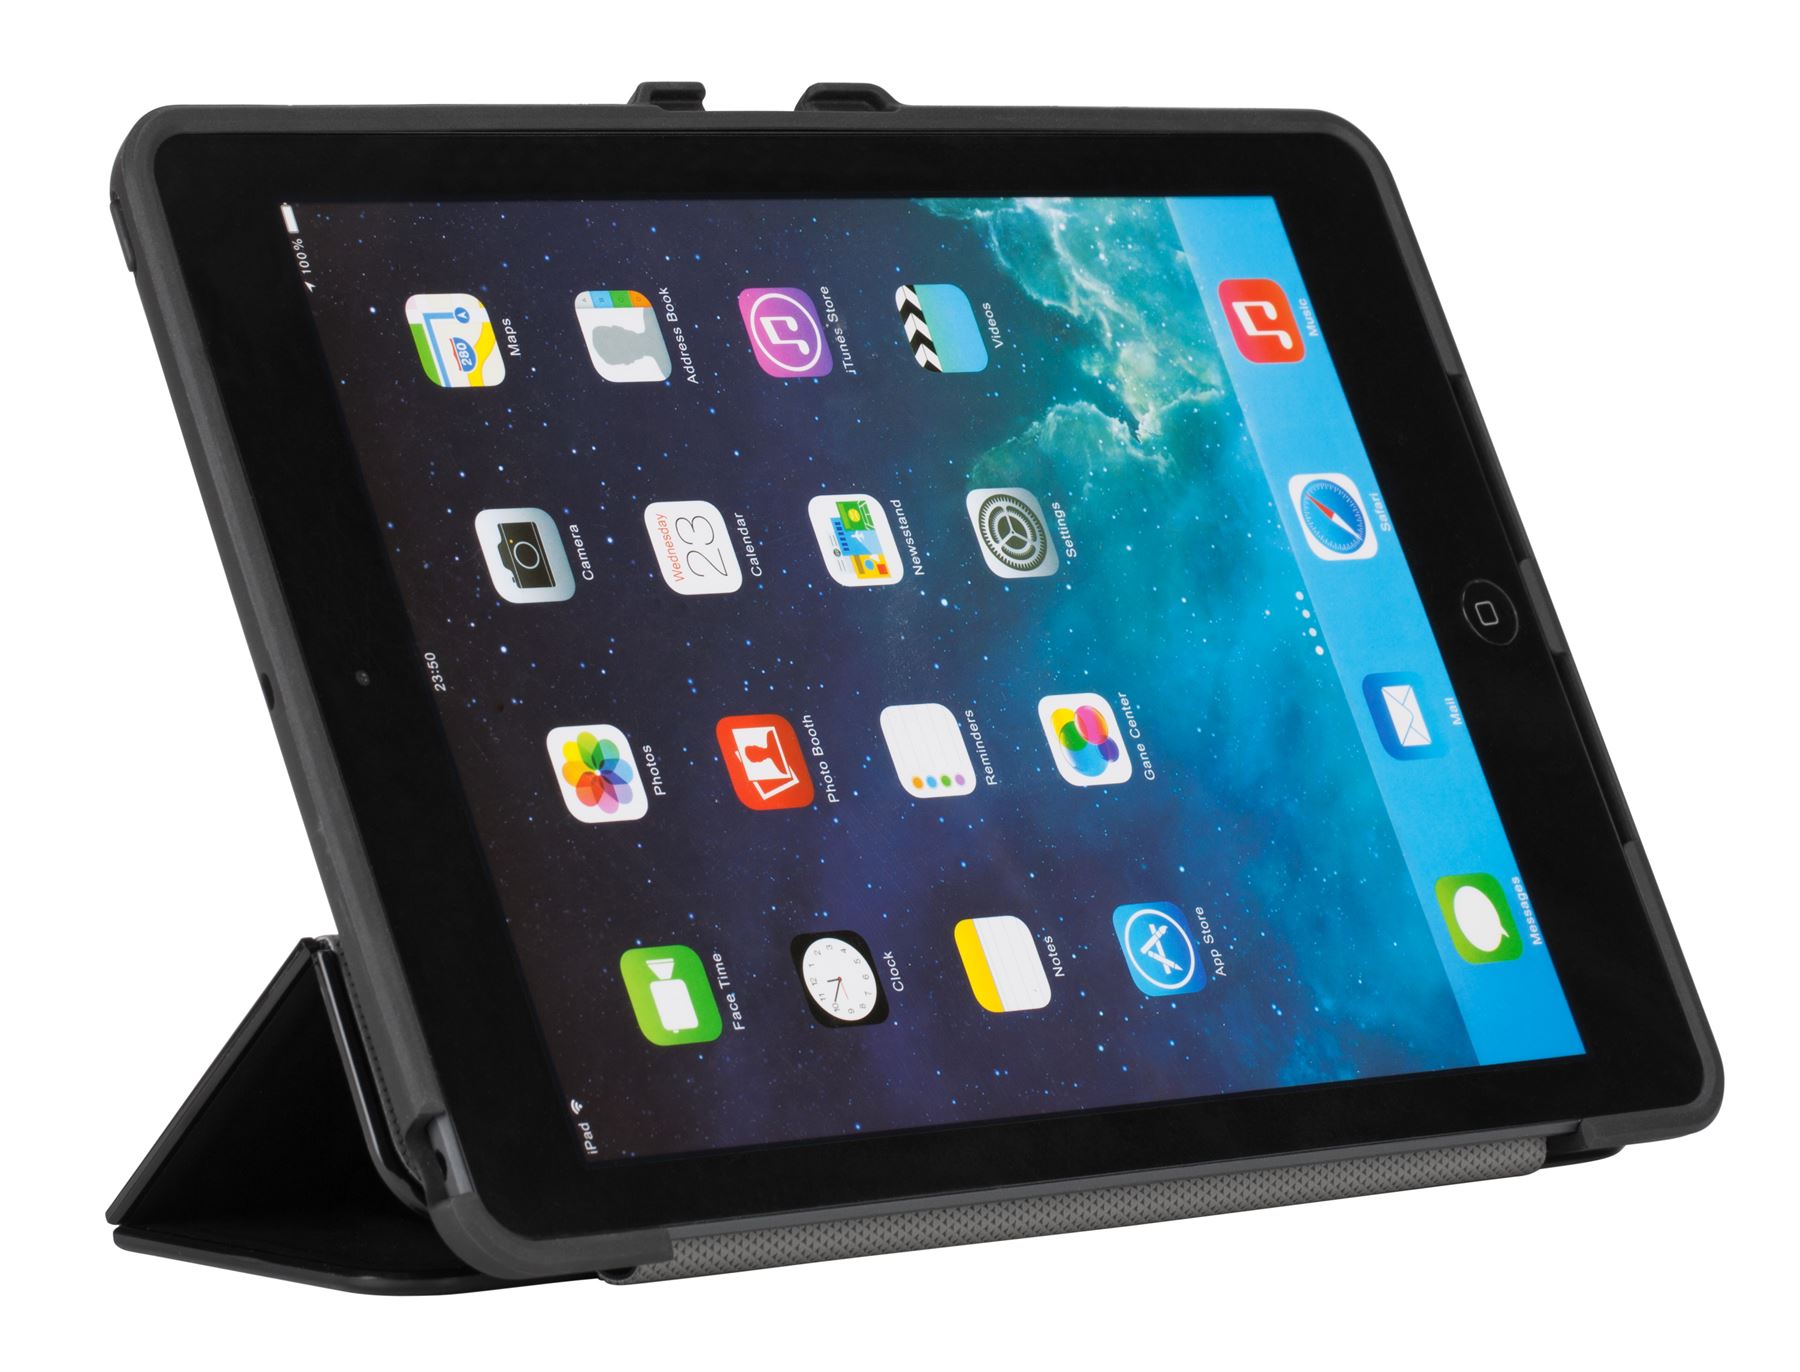 3D Protection Case for iPad Air 2 - THZ52202US - Black: Tablet Cases